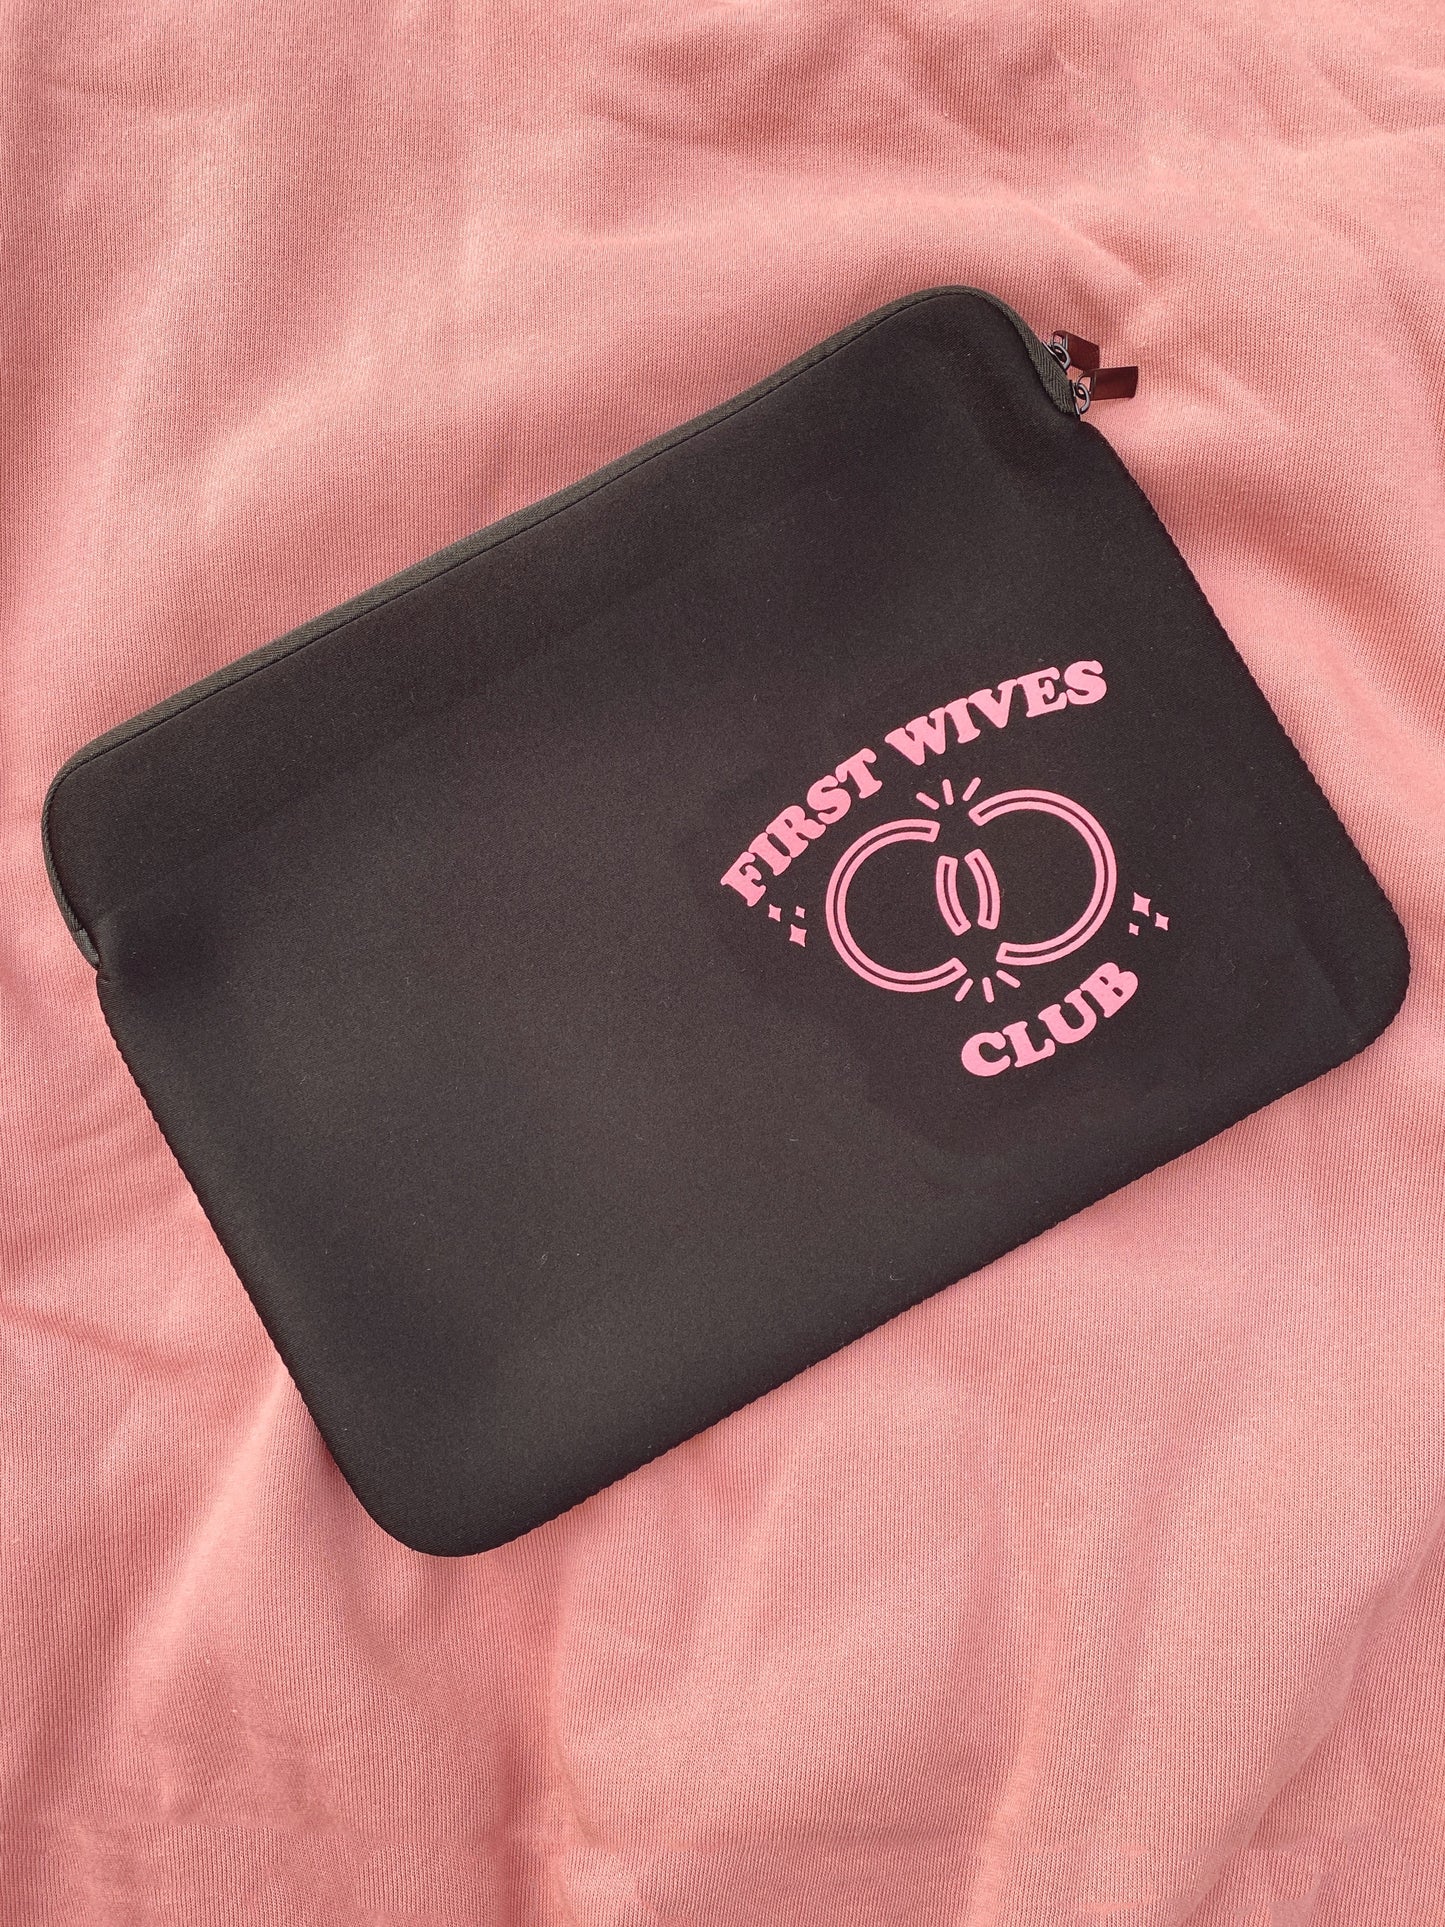 First Wives Club Laptop Sleeve